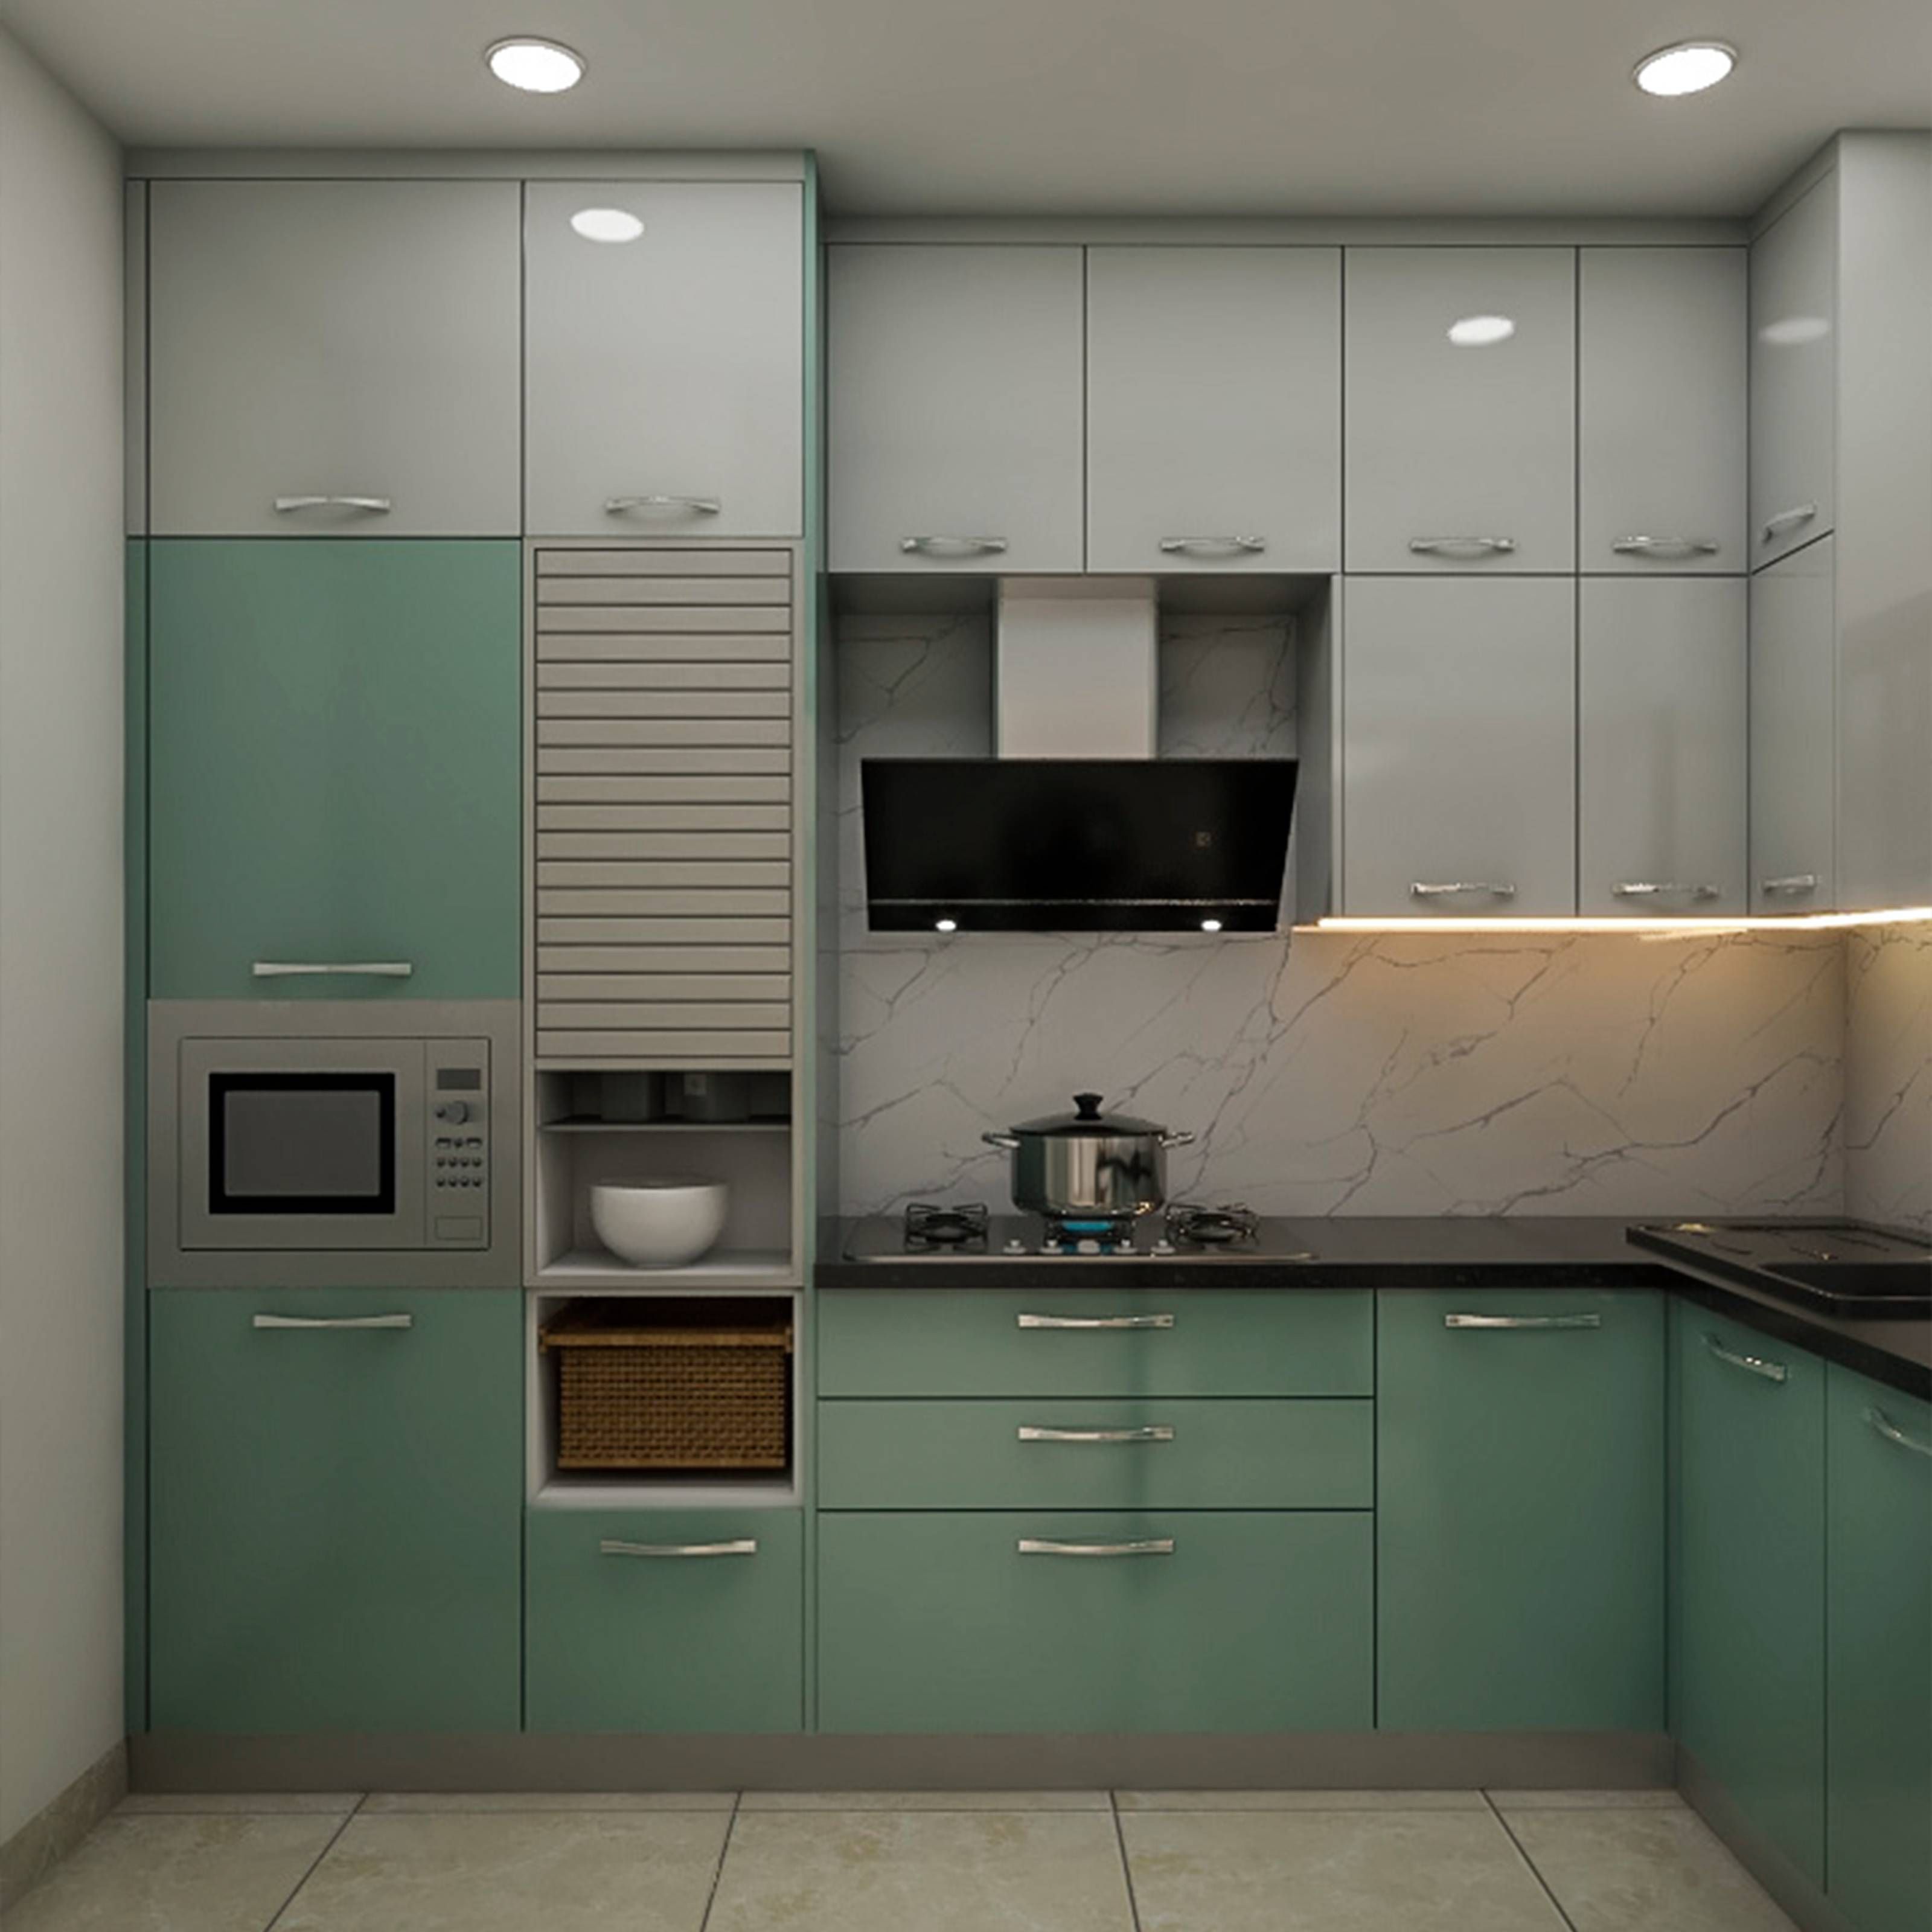 Modern L-Shaped Kitchen Design With Green And Grey Storage Units